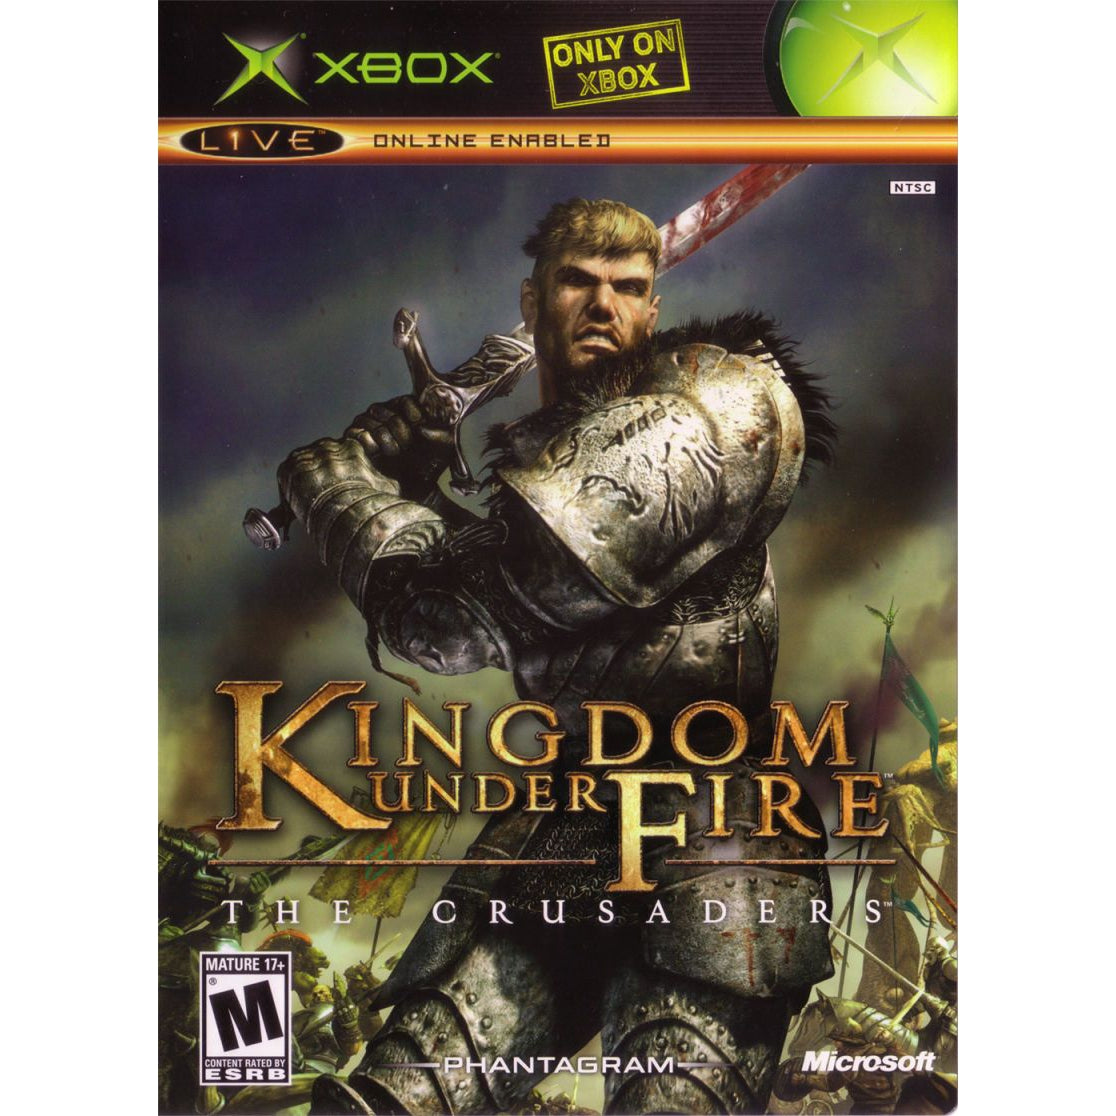 Kingdom Under Fire: The Crusaders - Microsoft Xbox Game Complete - YourGamingShop.com - Buy, Sell, Trade Video Games Online. 120 Day Warranty. Satisfaction Guaranteed.